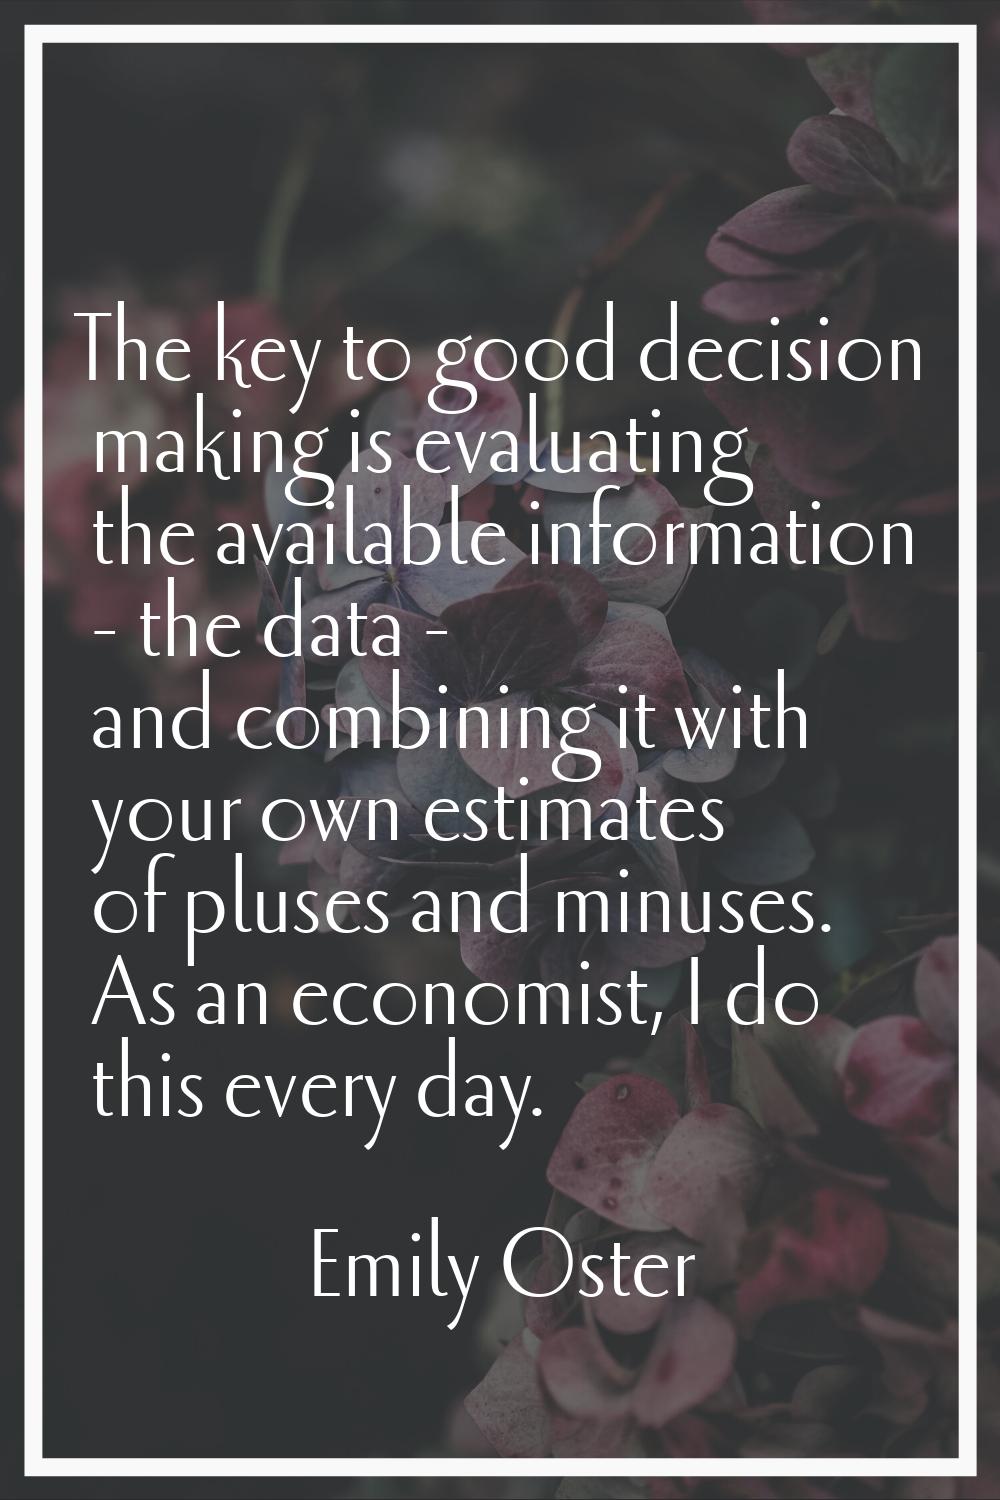 The key to good decision making is evaluating the available information - the data - and combining 